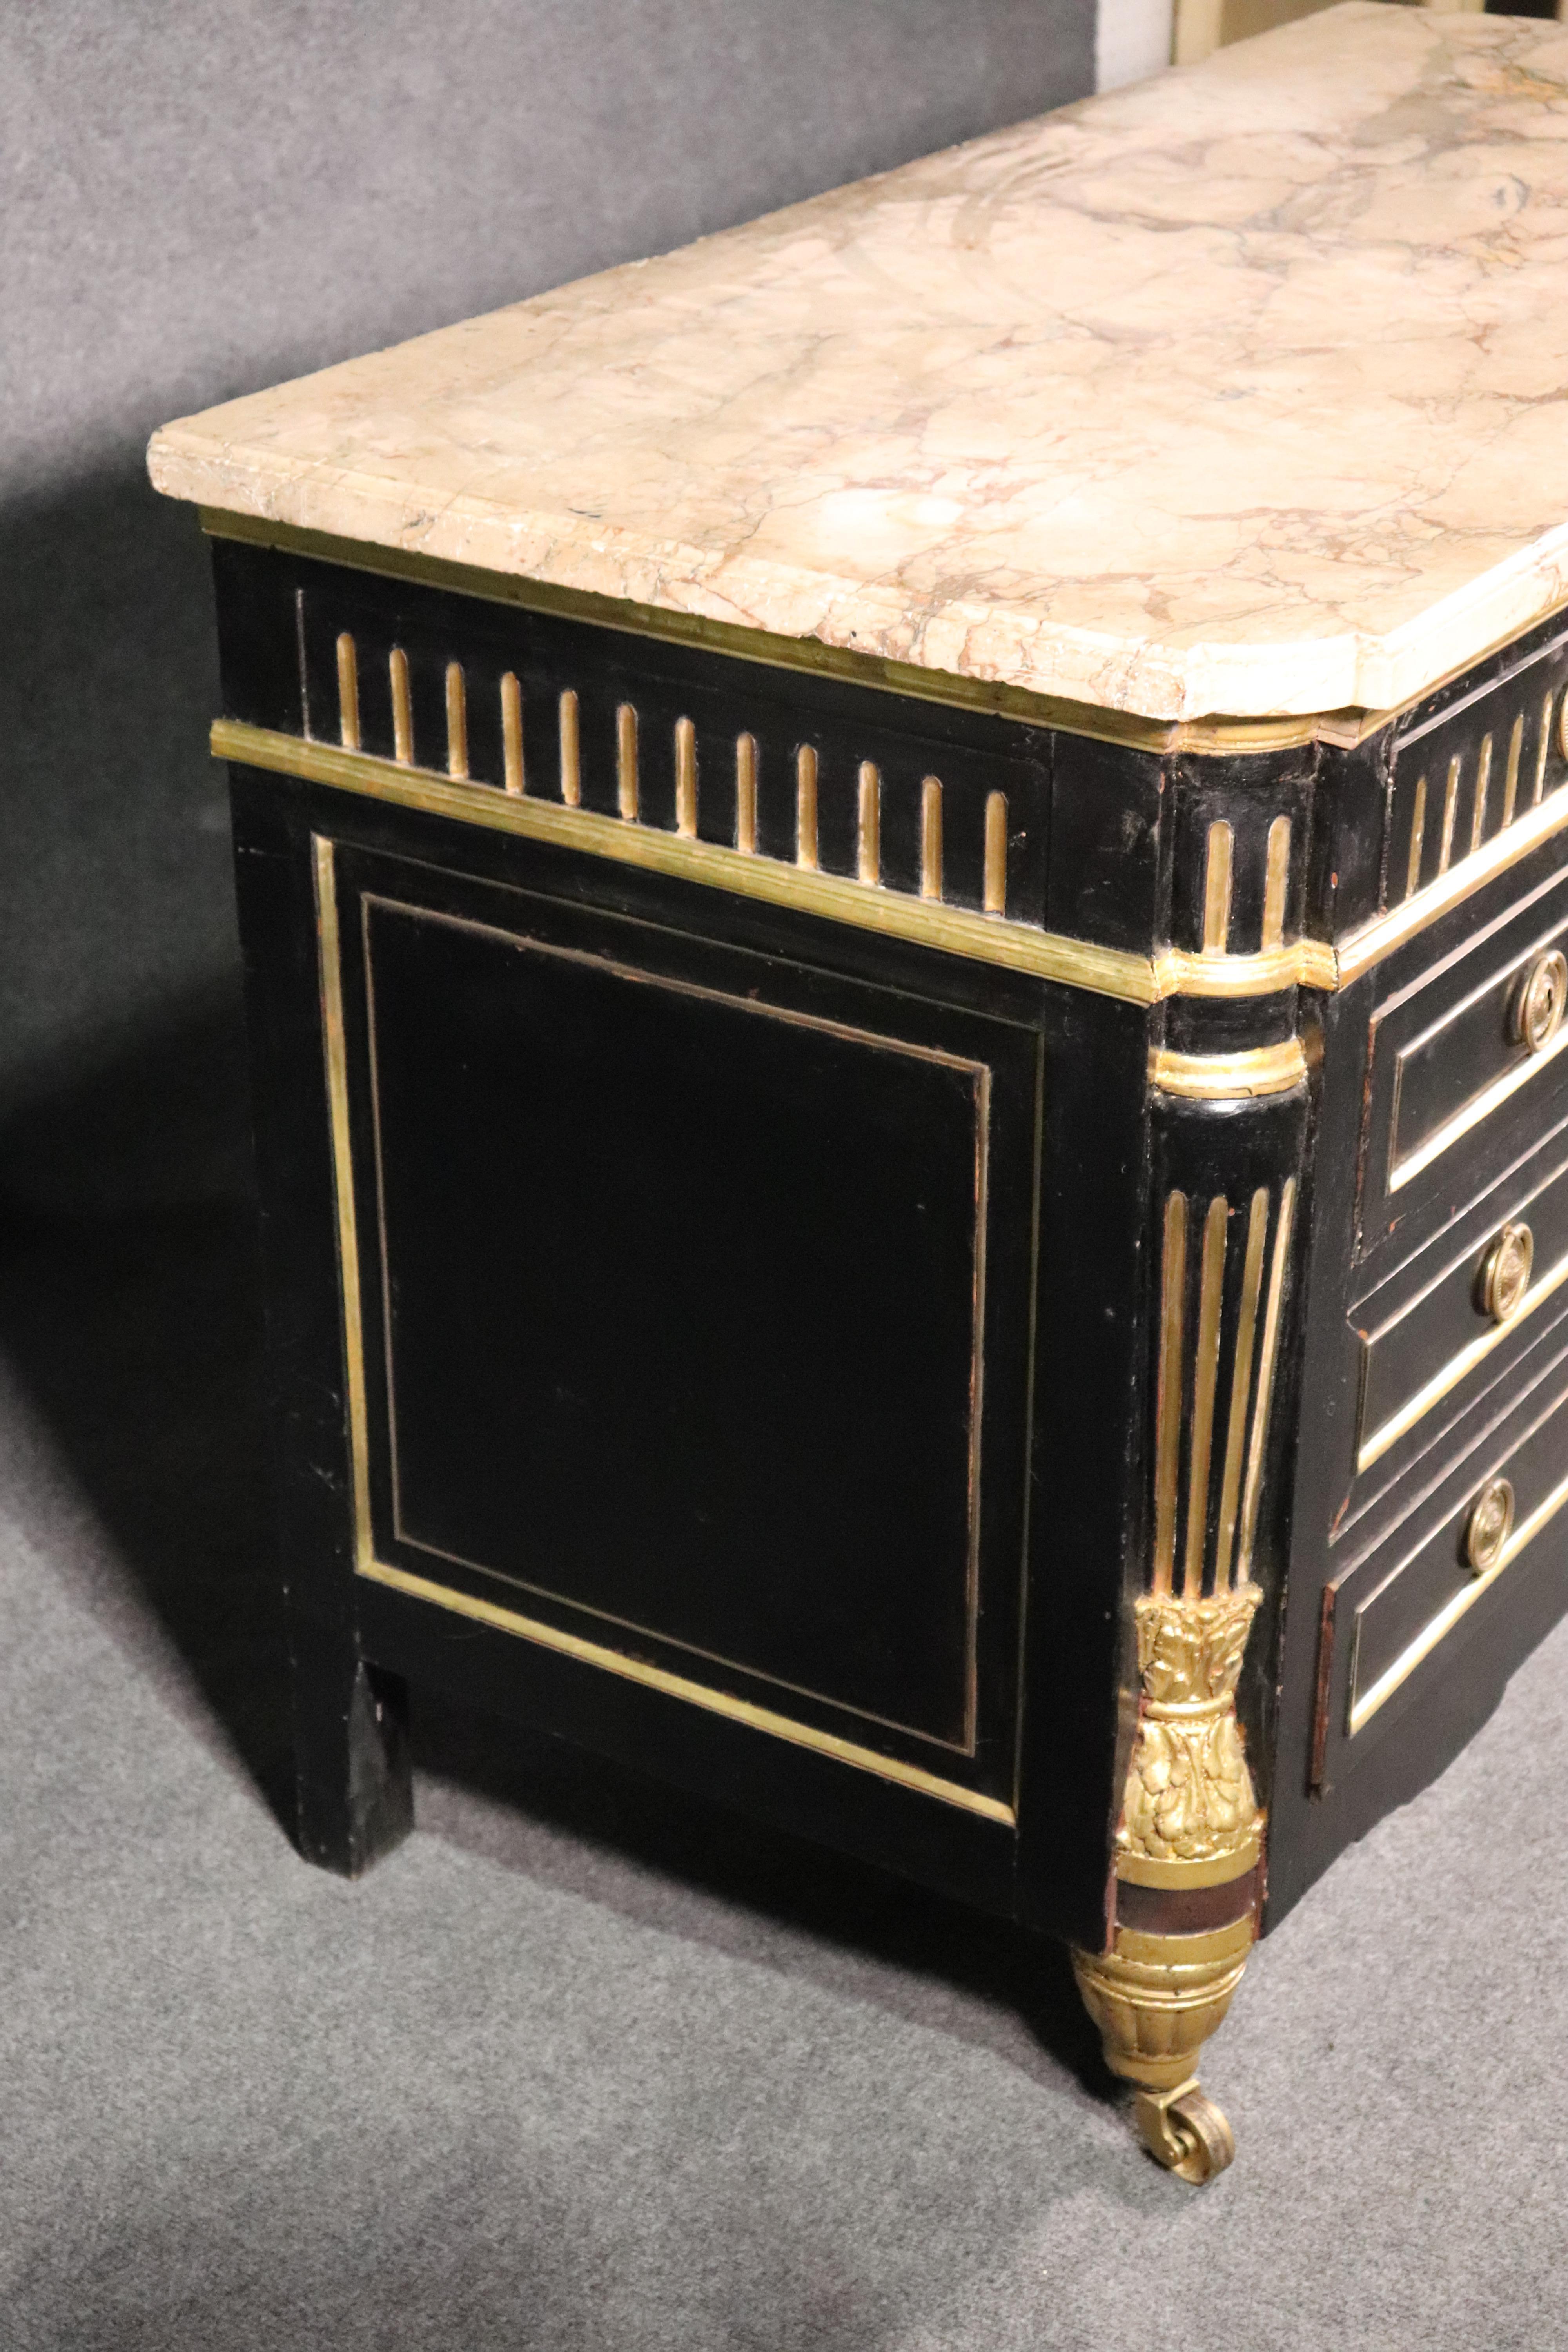 Late 19th Century Ebonized and Gilded Russian Baltic Marble-Top Louis XVI Dresser Commode C1870